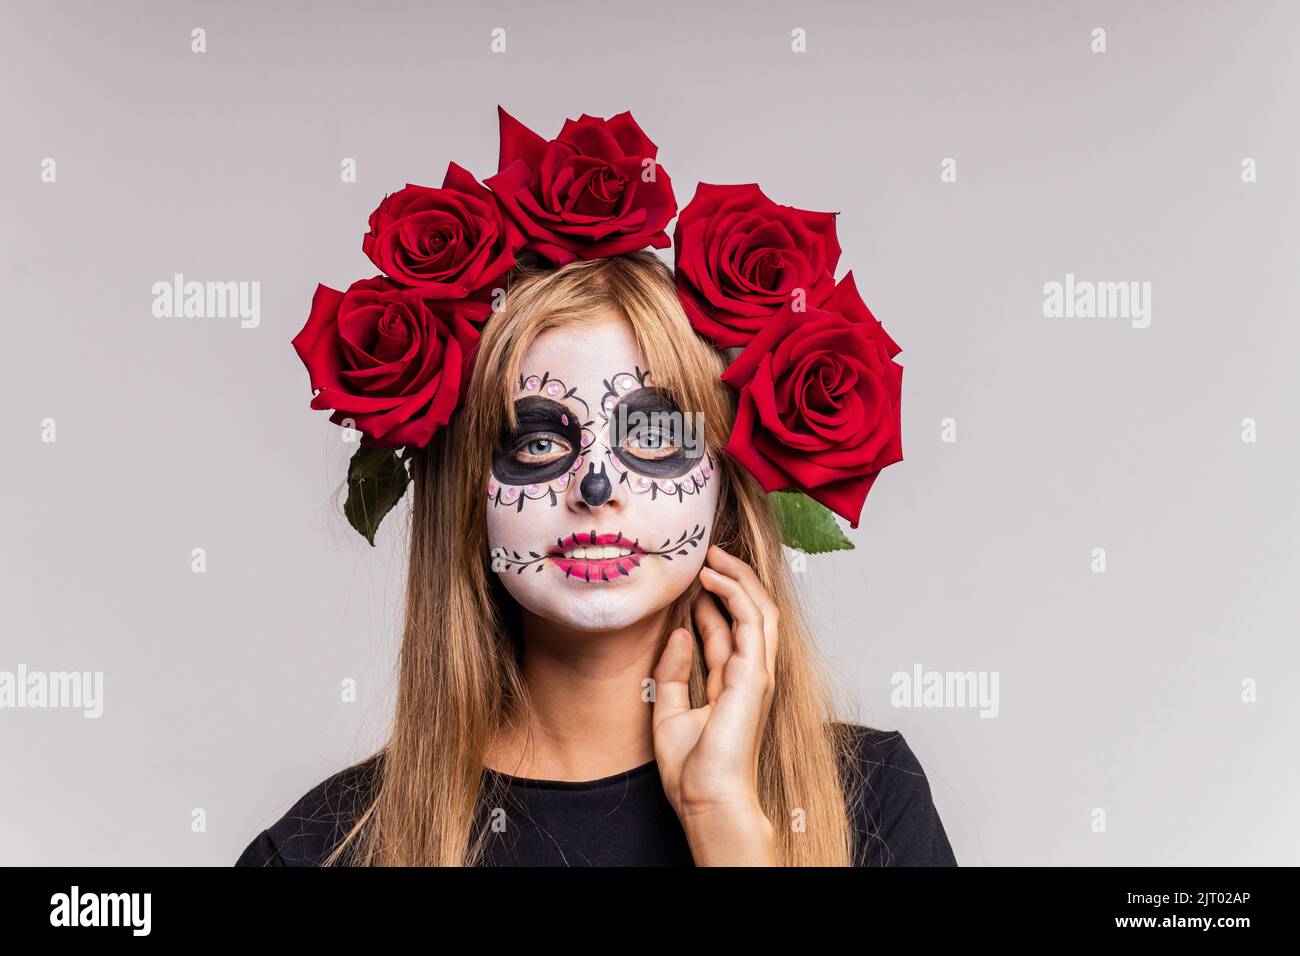 teenager girl with cool skull makeup with roses on head looking at camera in studio Stock Photo